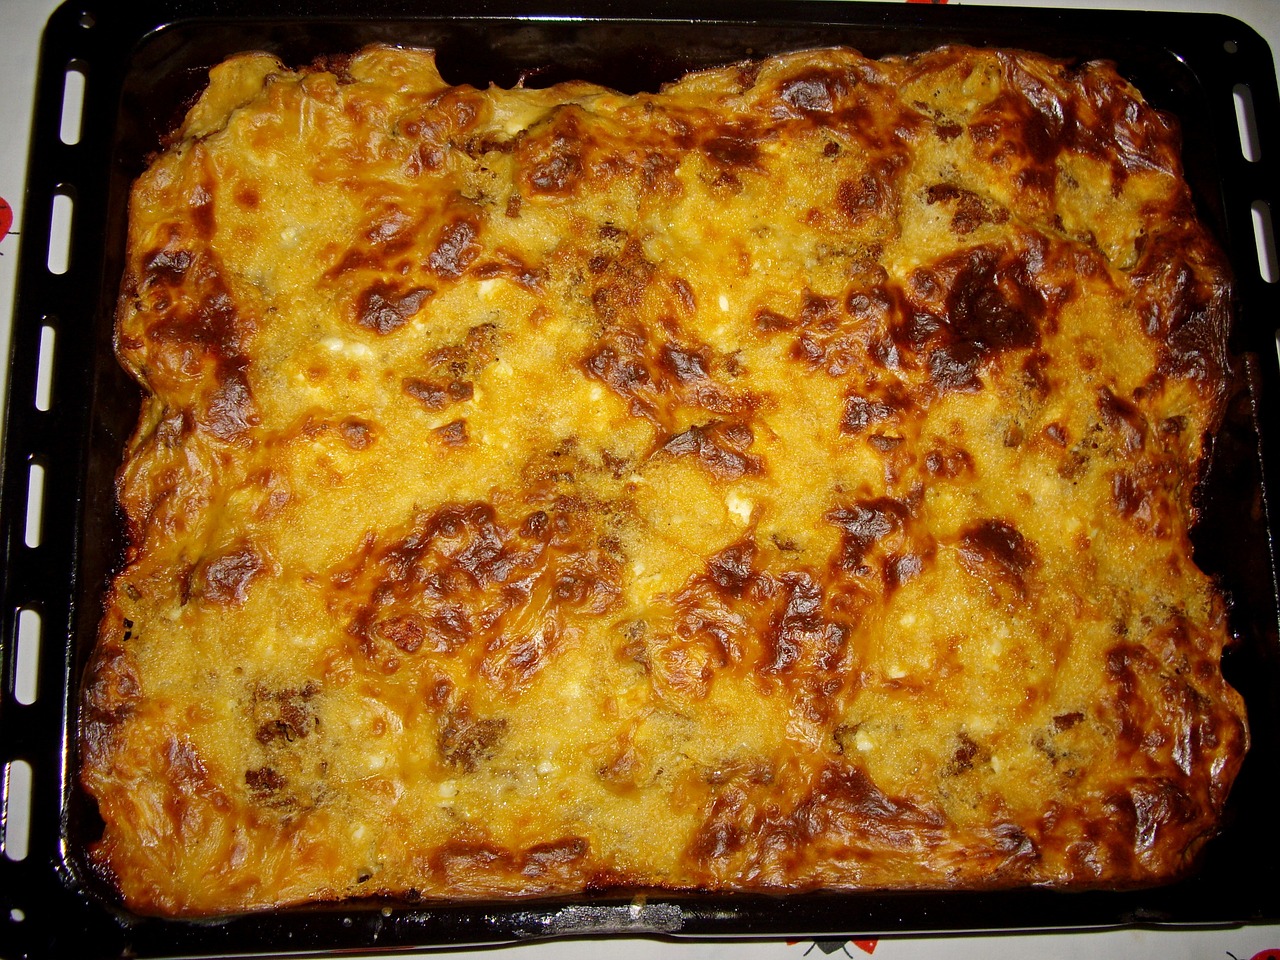 The Best Moussaka!